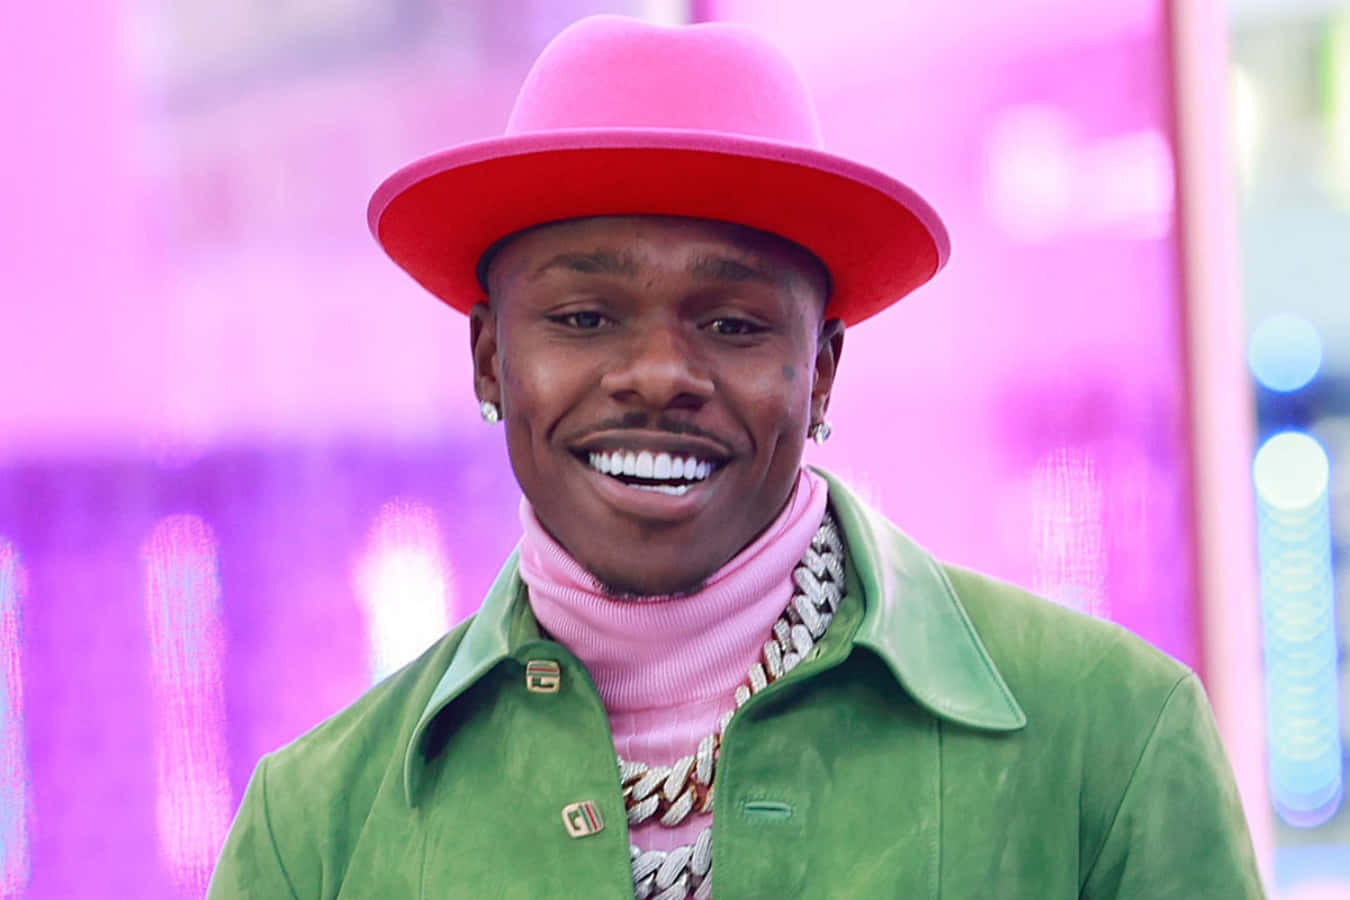 DaBaby in a stylish pose against a graffiti backdrop